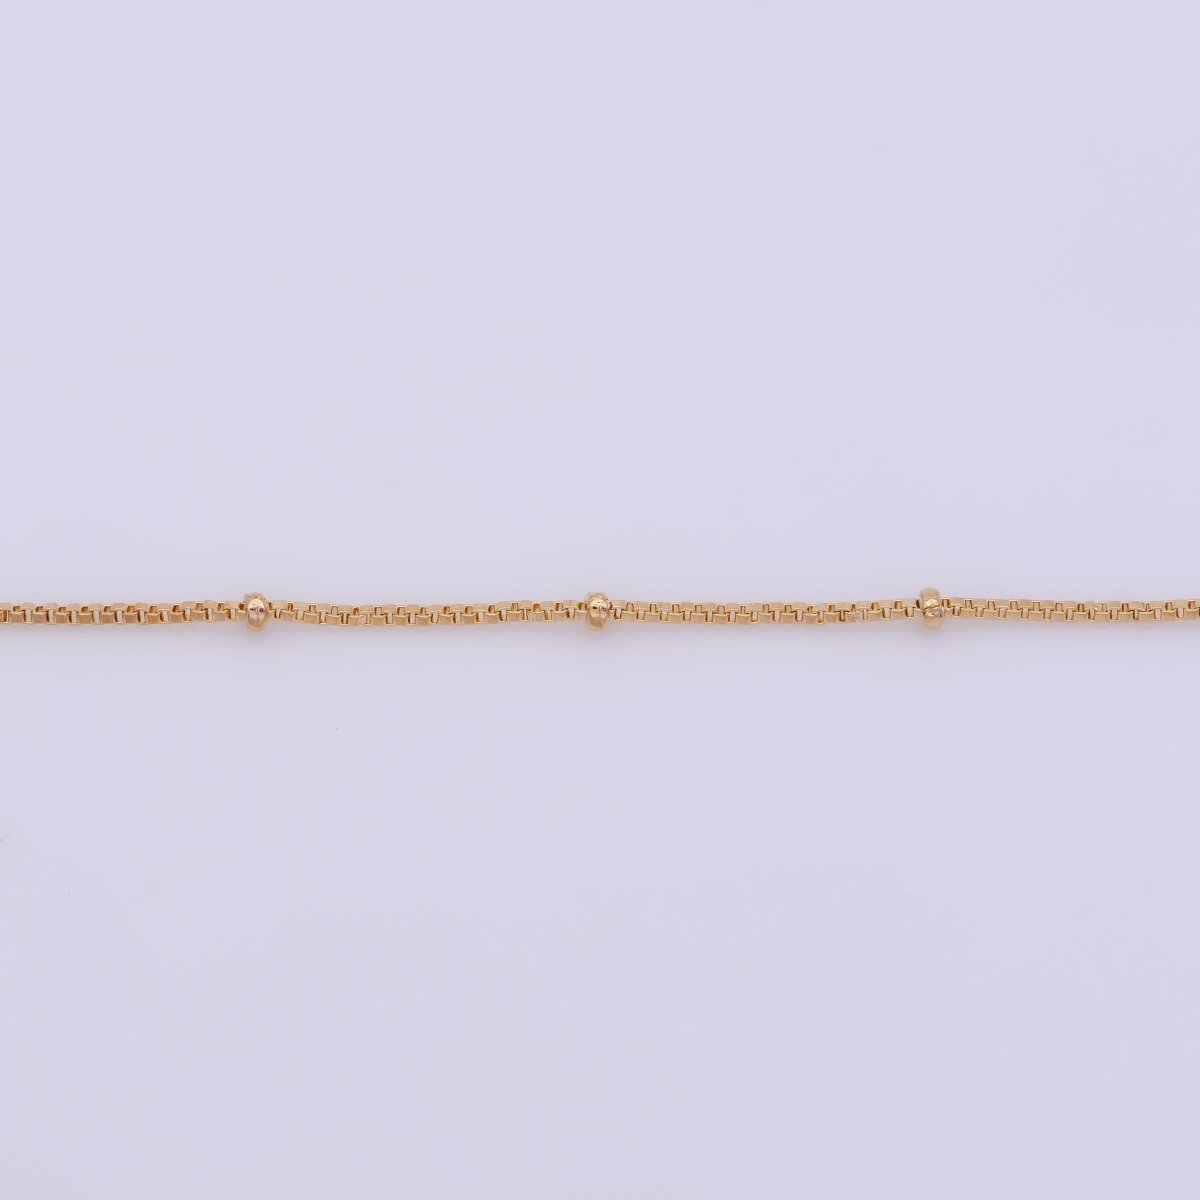 17.5 inch Box Chain Necklace, 18K Gold Plated Box Finished Chain For Jewelry Necklace Making, Dainty 1.9m Box Necklace w/ Spring Ring | CN-382 Clearance Pricing - DLUXCA